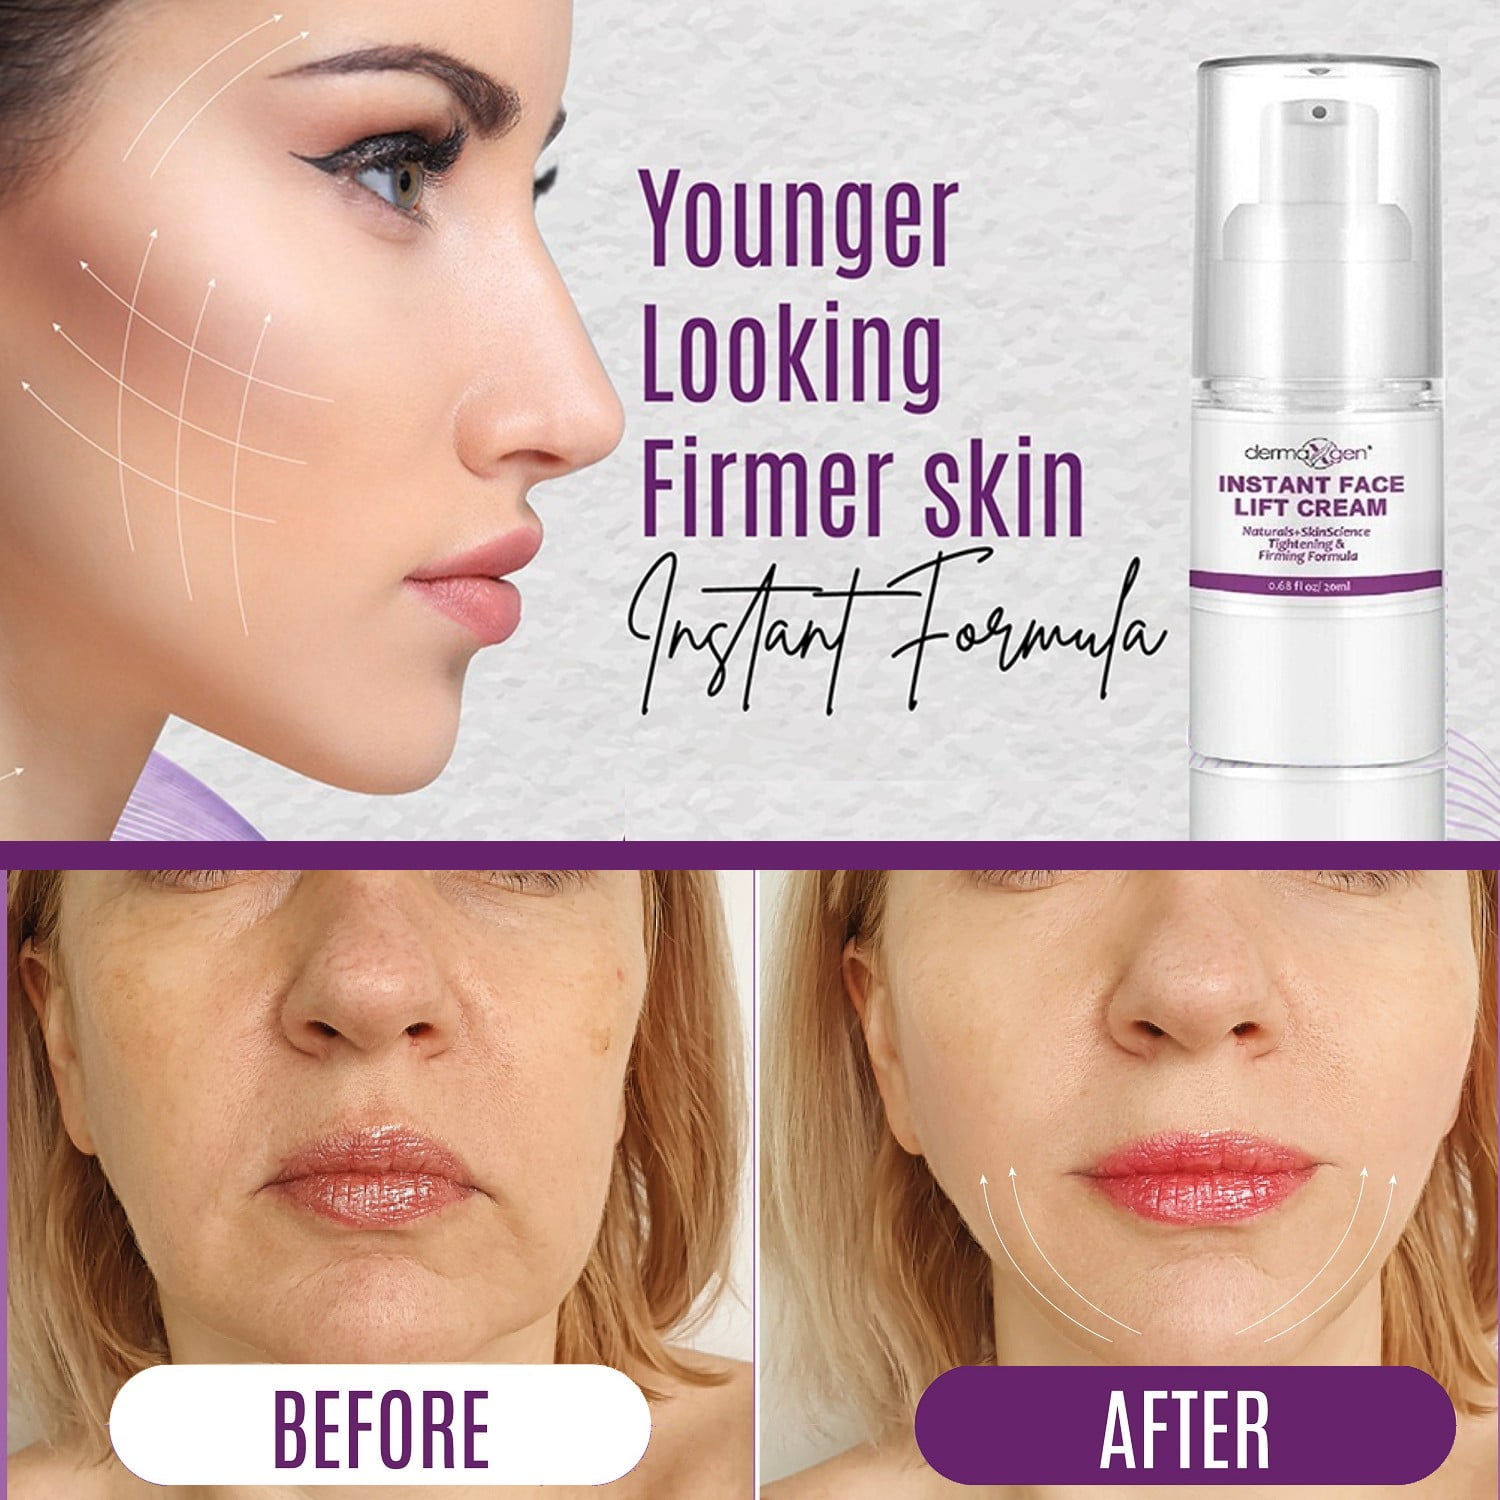 Dermaxgen INSTANT FACE LIFT - Anti-Aging, Lifting & Firming Cream for Loose Sagging Skin, Fine Lines, & Crow's Feet (INSTANT RESULTS) - 20 ML - Walmart.com